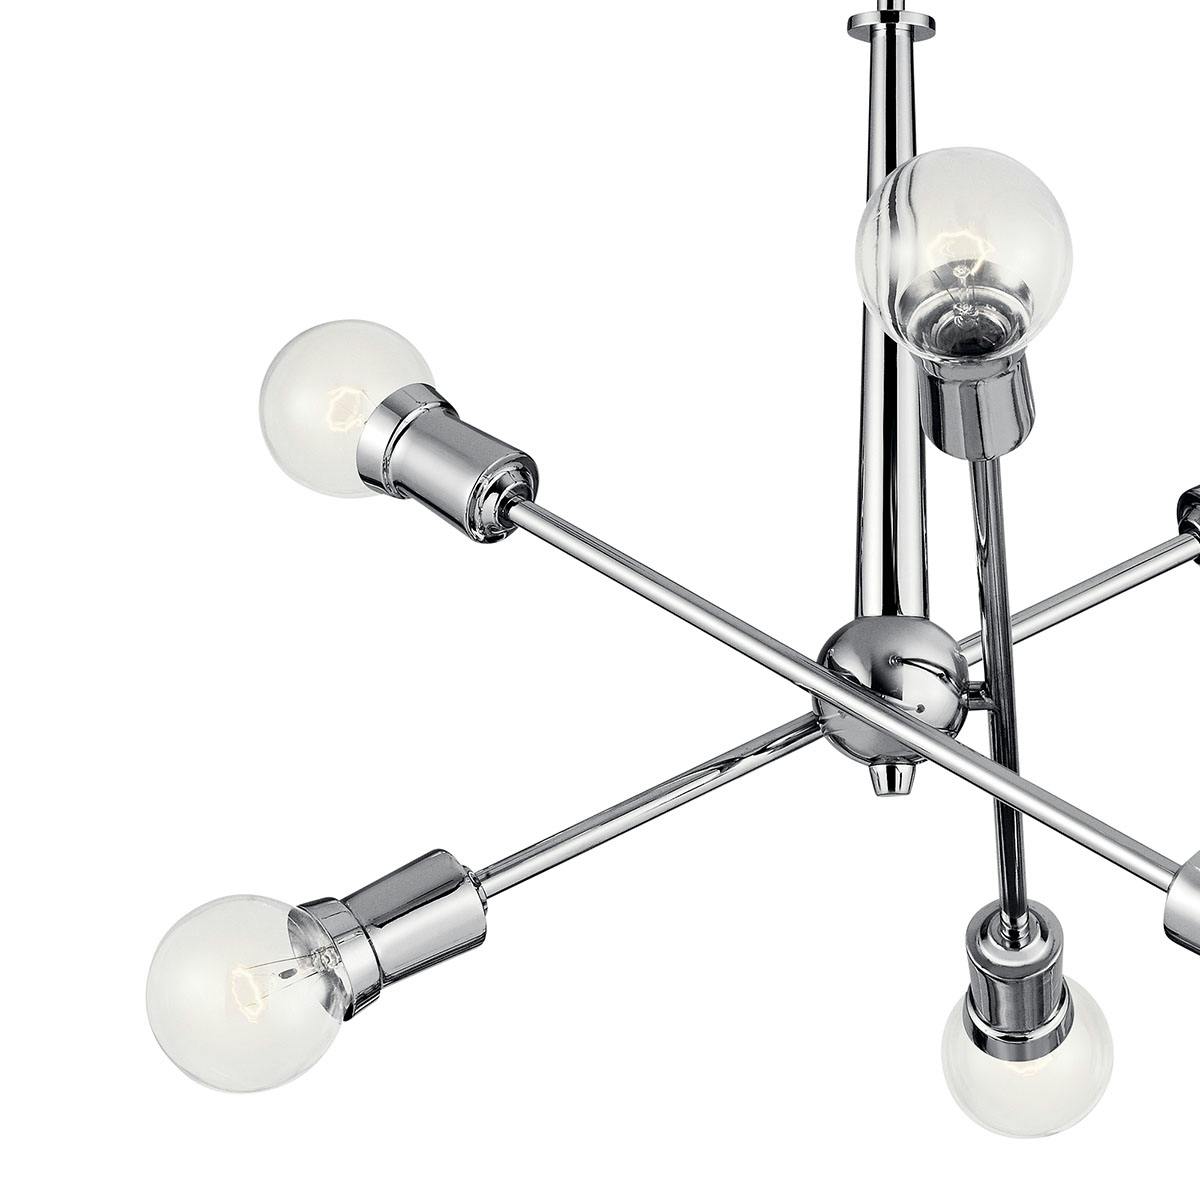 Close up view of the Armstrong 6 Light Chandelier Chrome on a white background